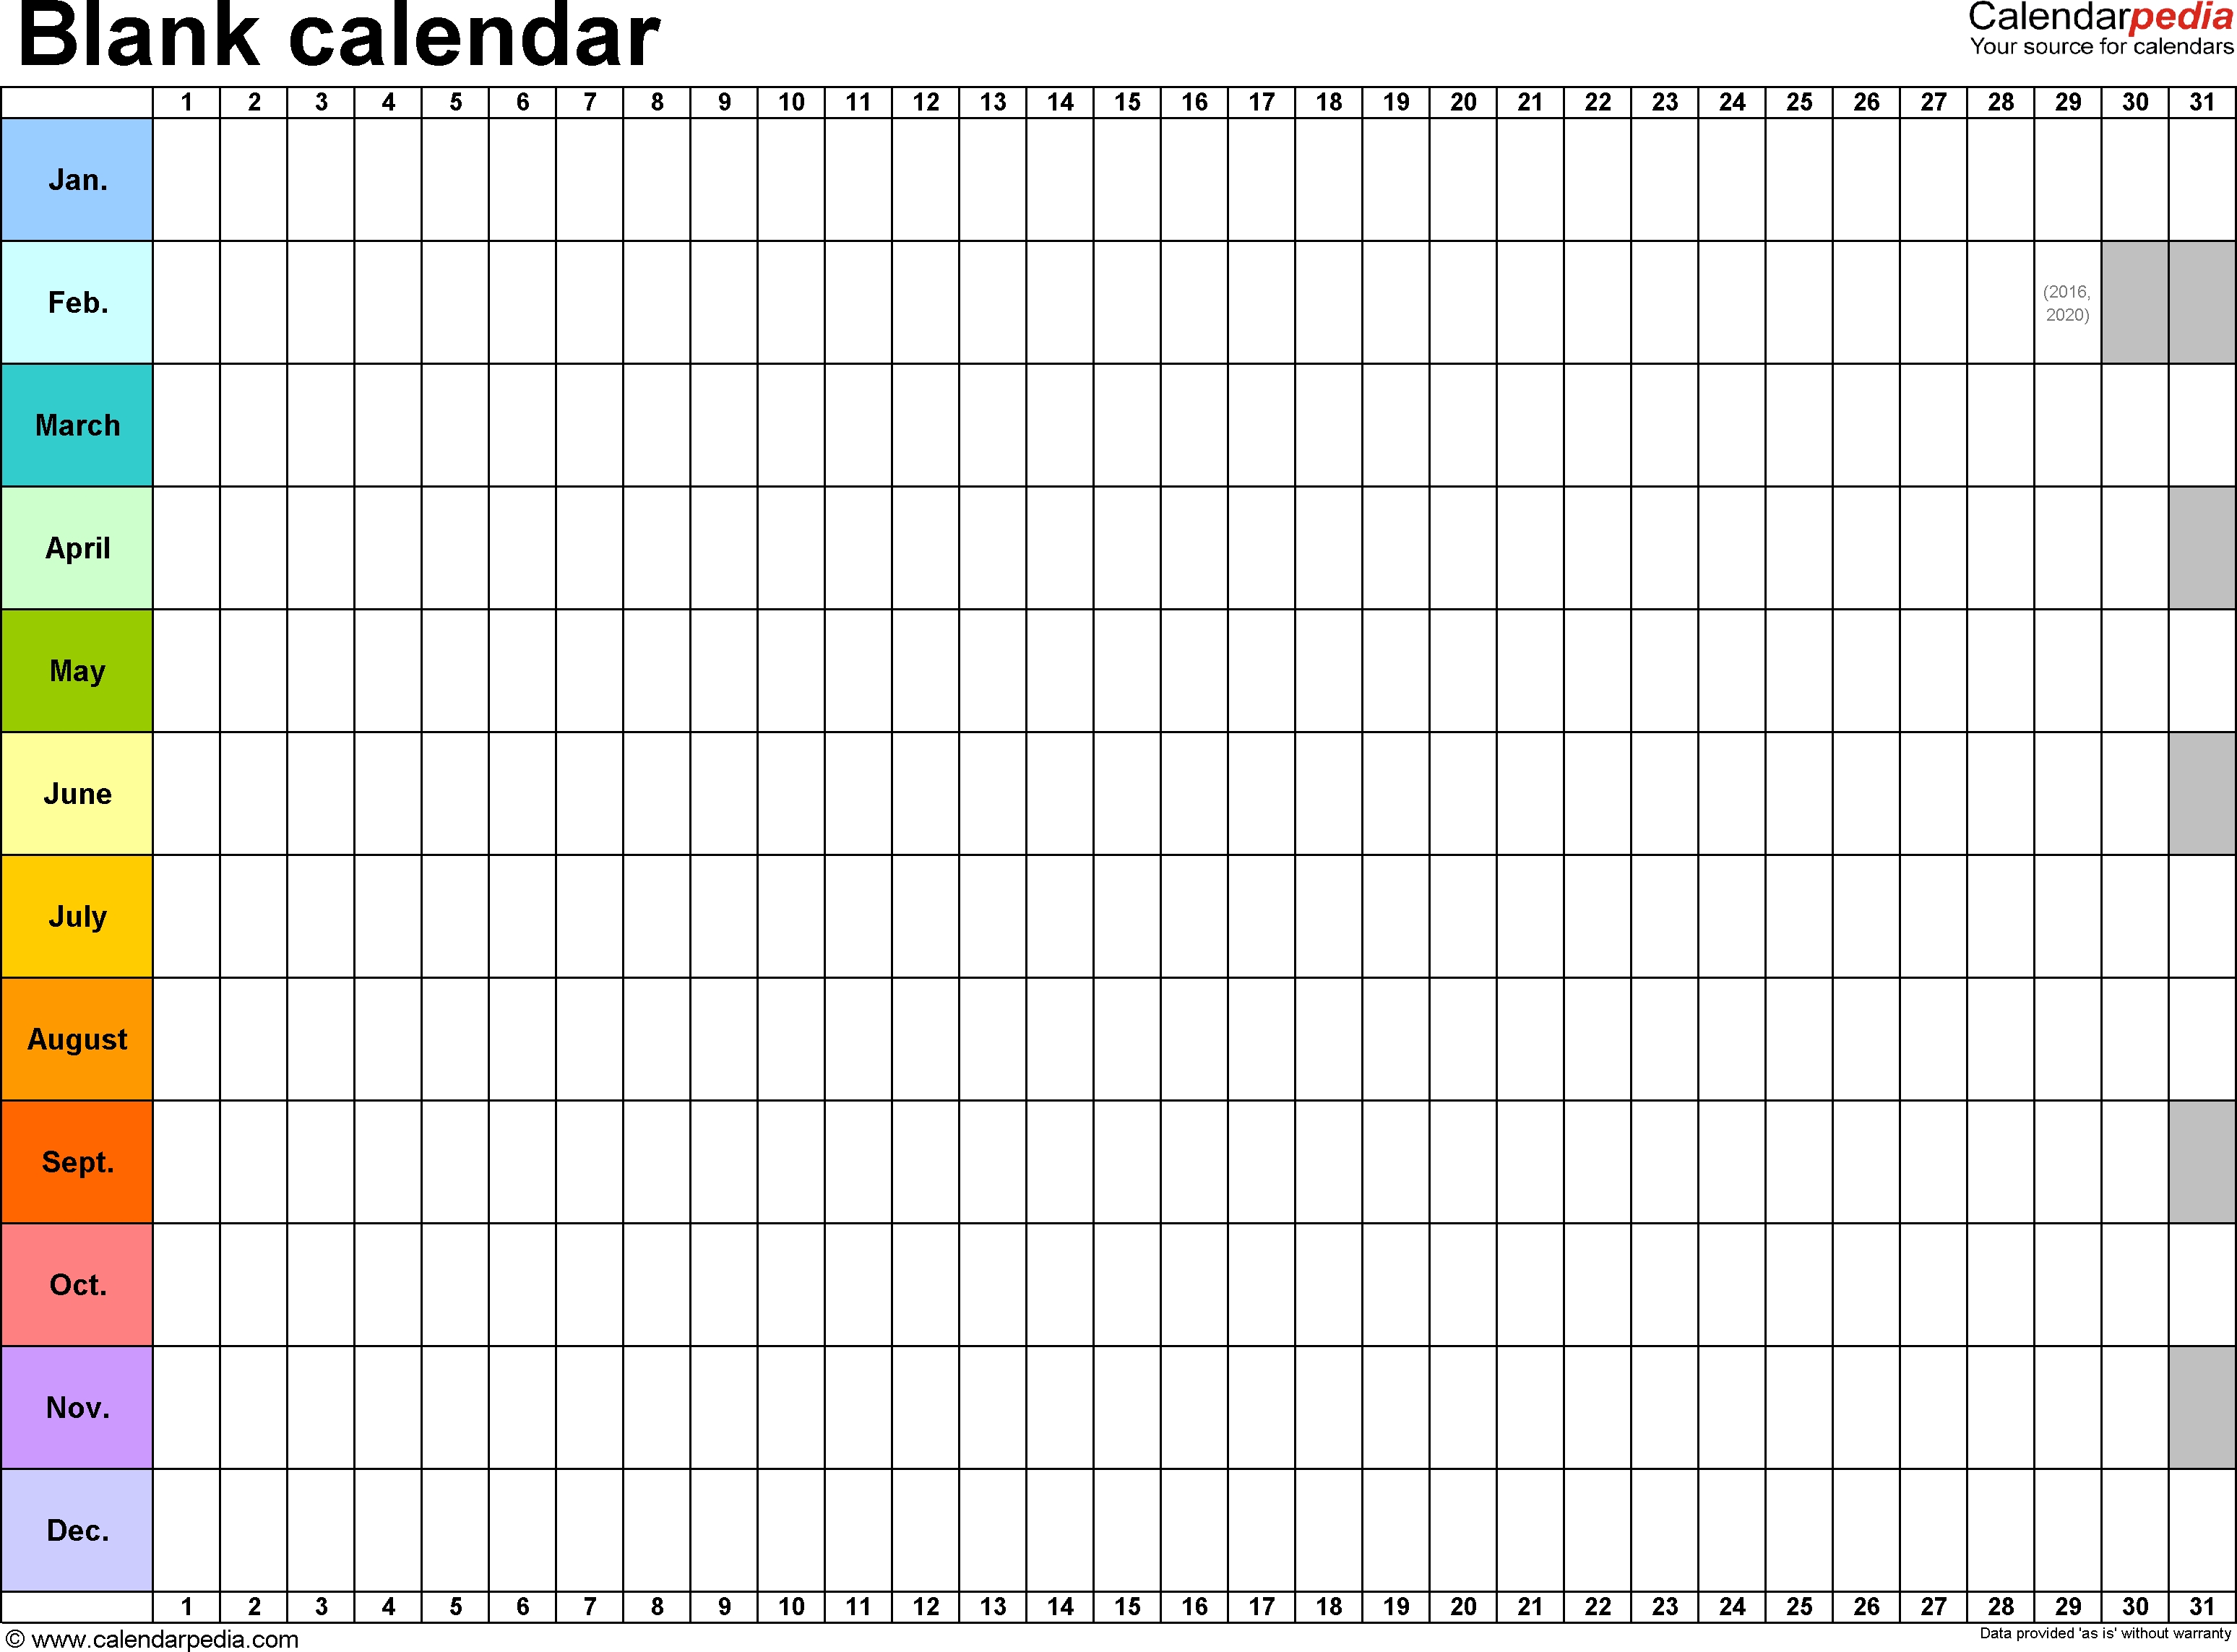 Blank Calendar - 9 Free Printable Microsoft Word Templates Monthly Calendar On One Page